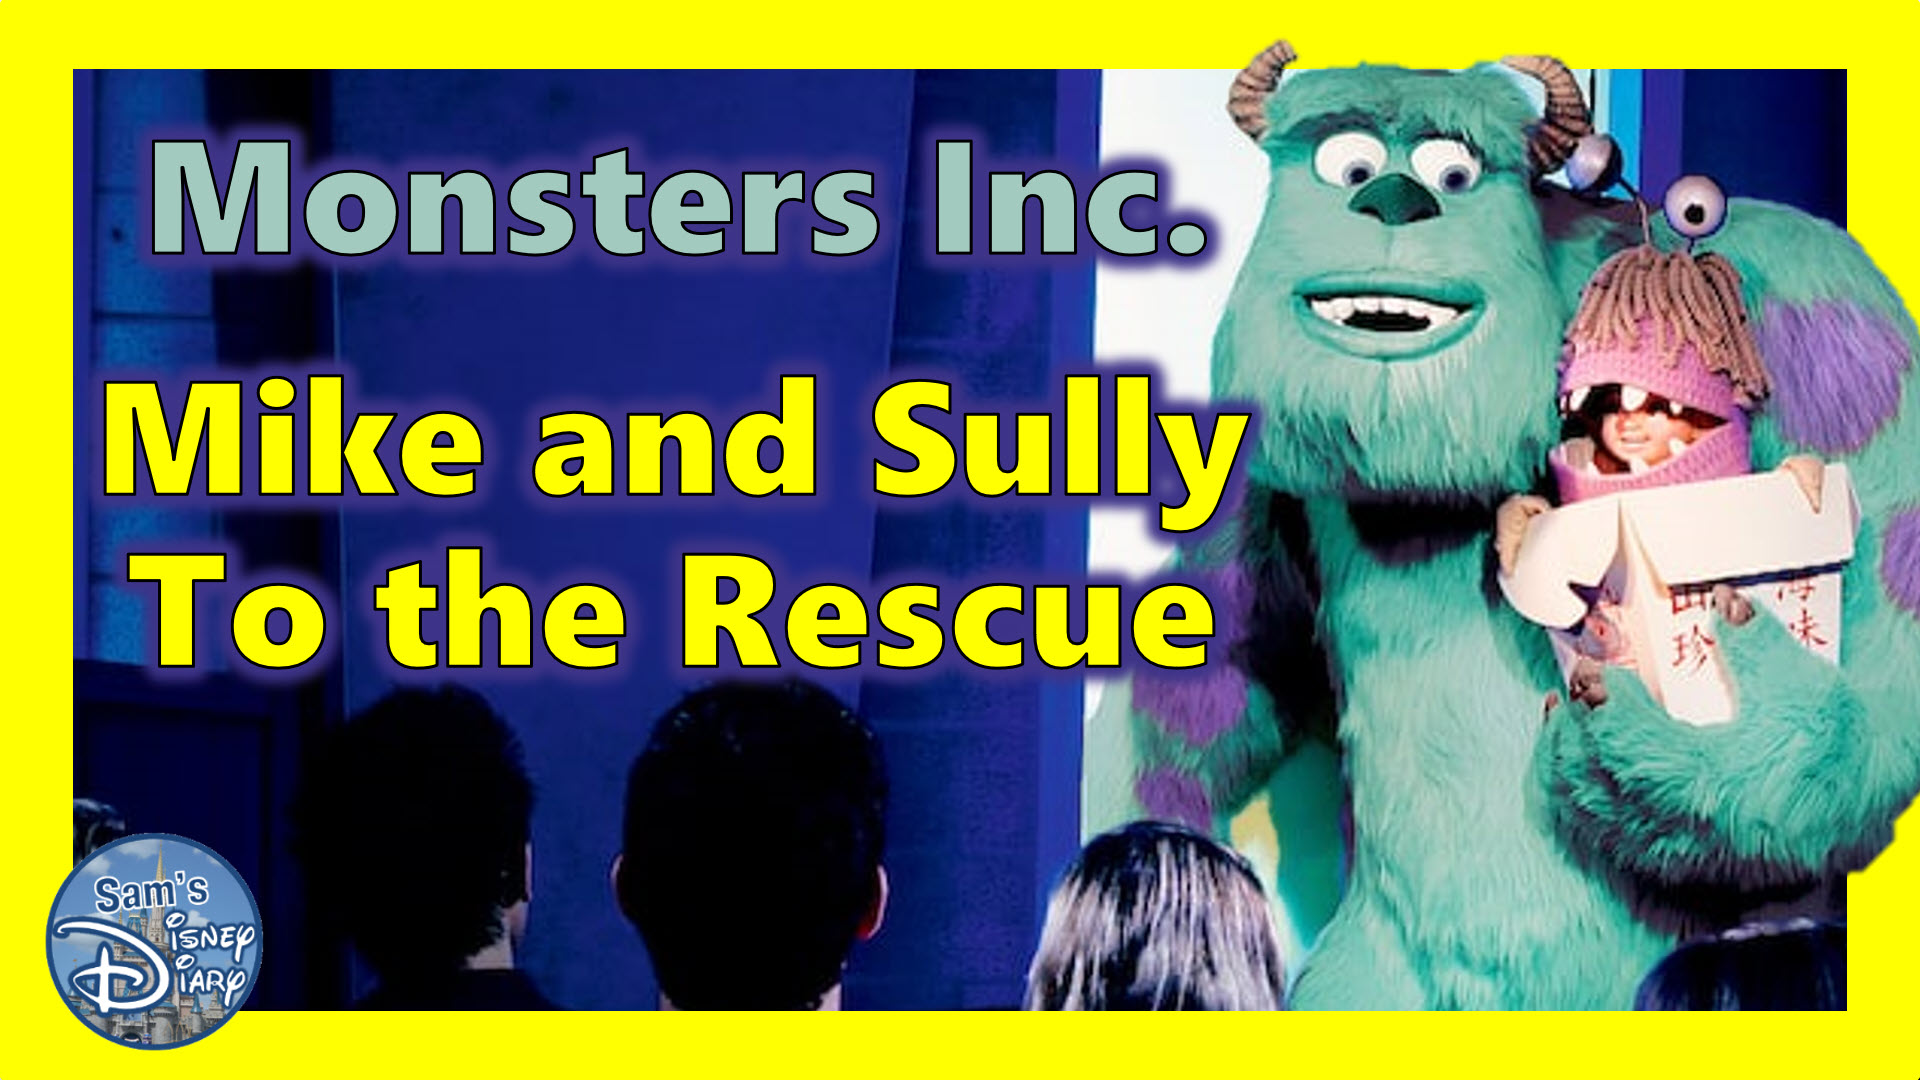 Monsters, Inc. Mike and Sulley to the Rescue - Disney's California